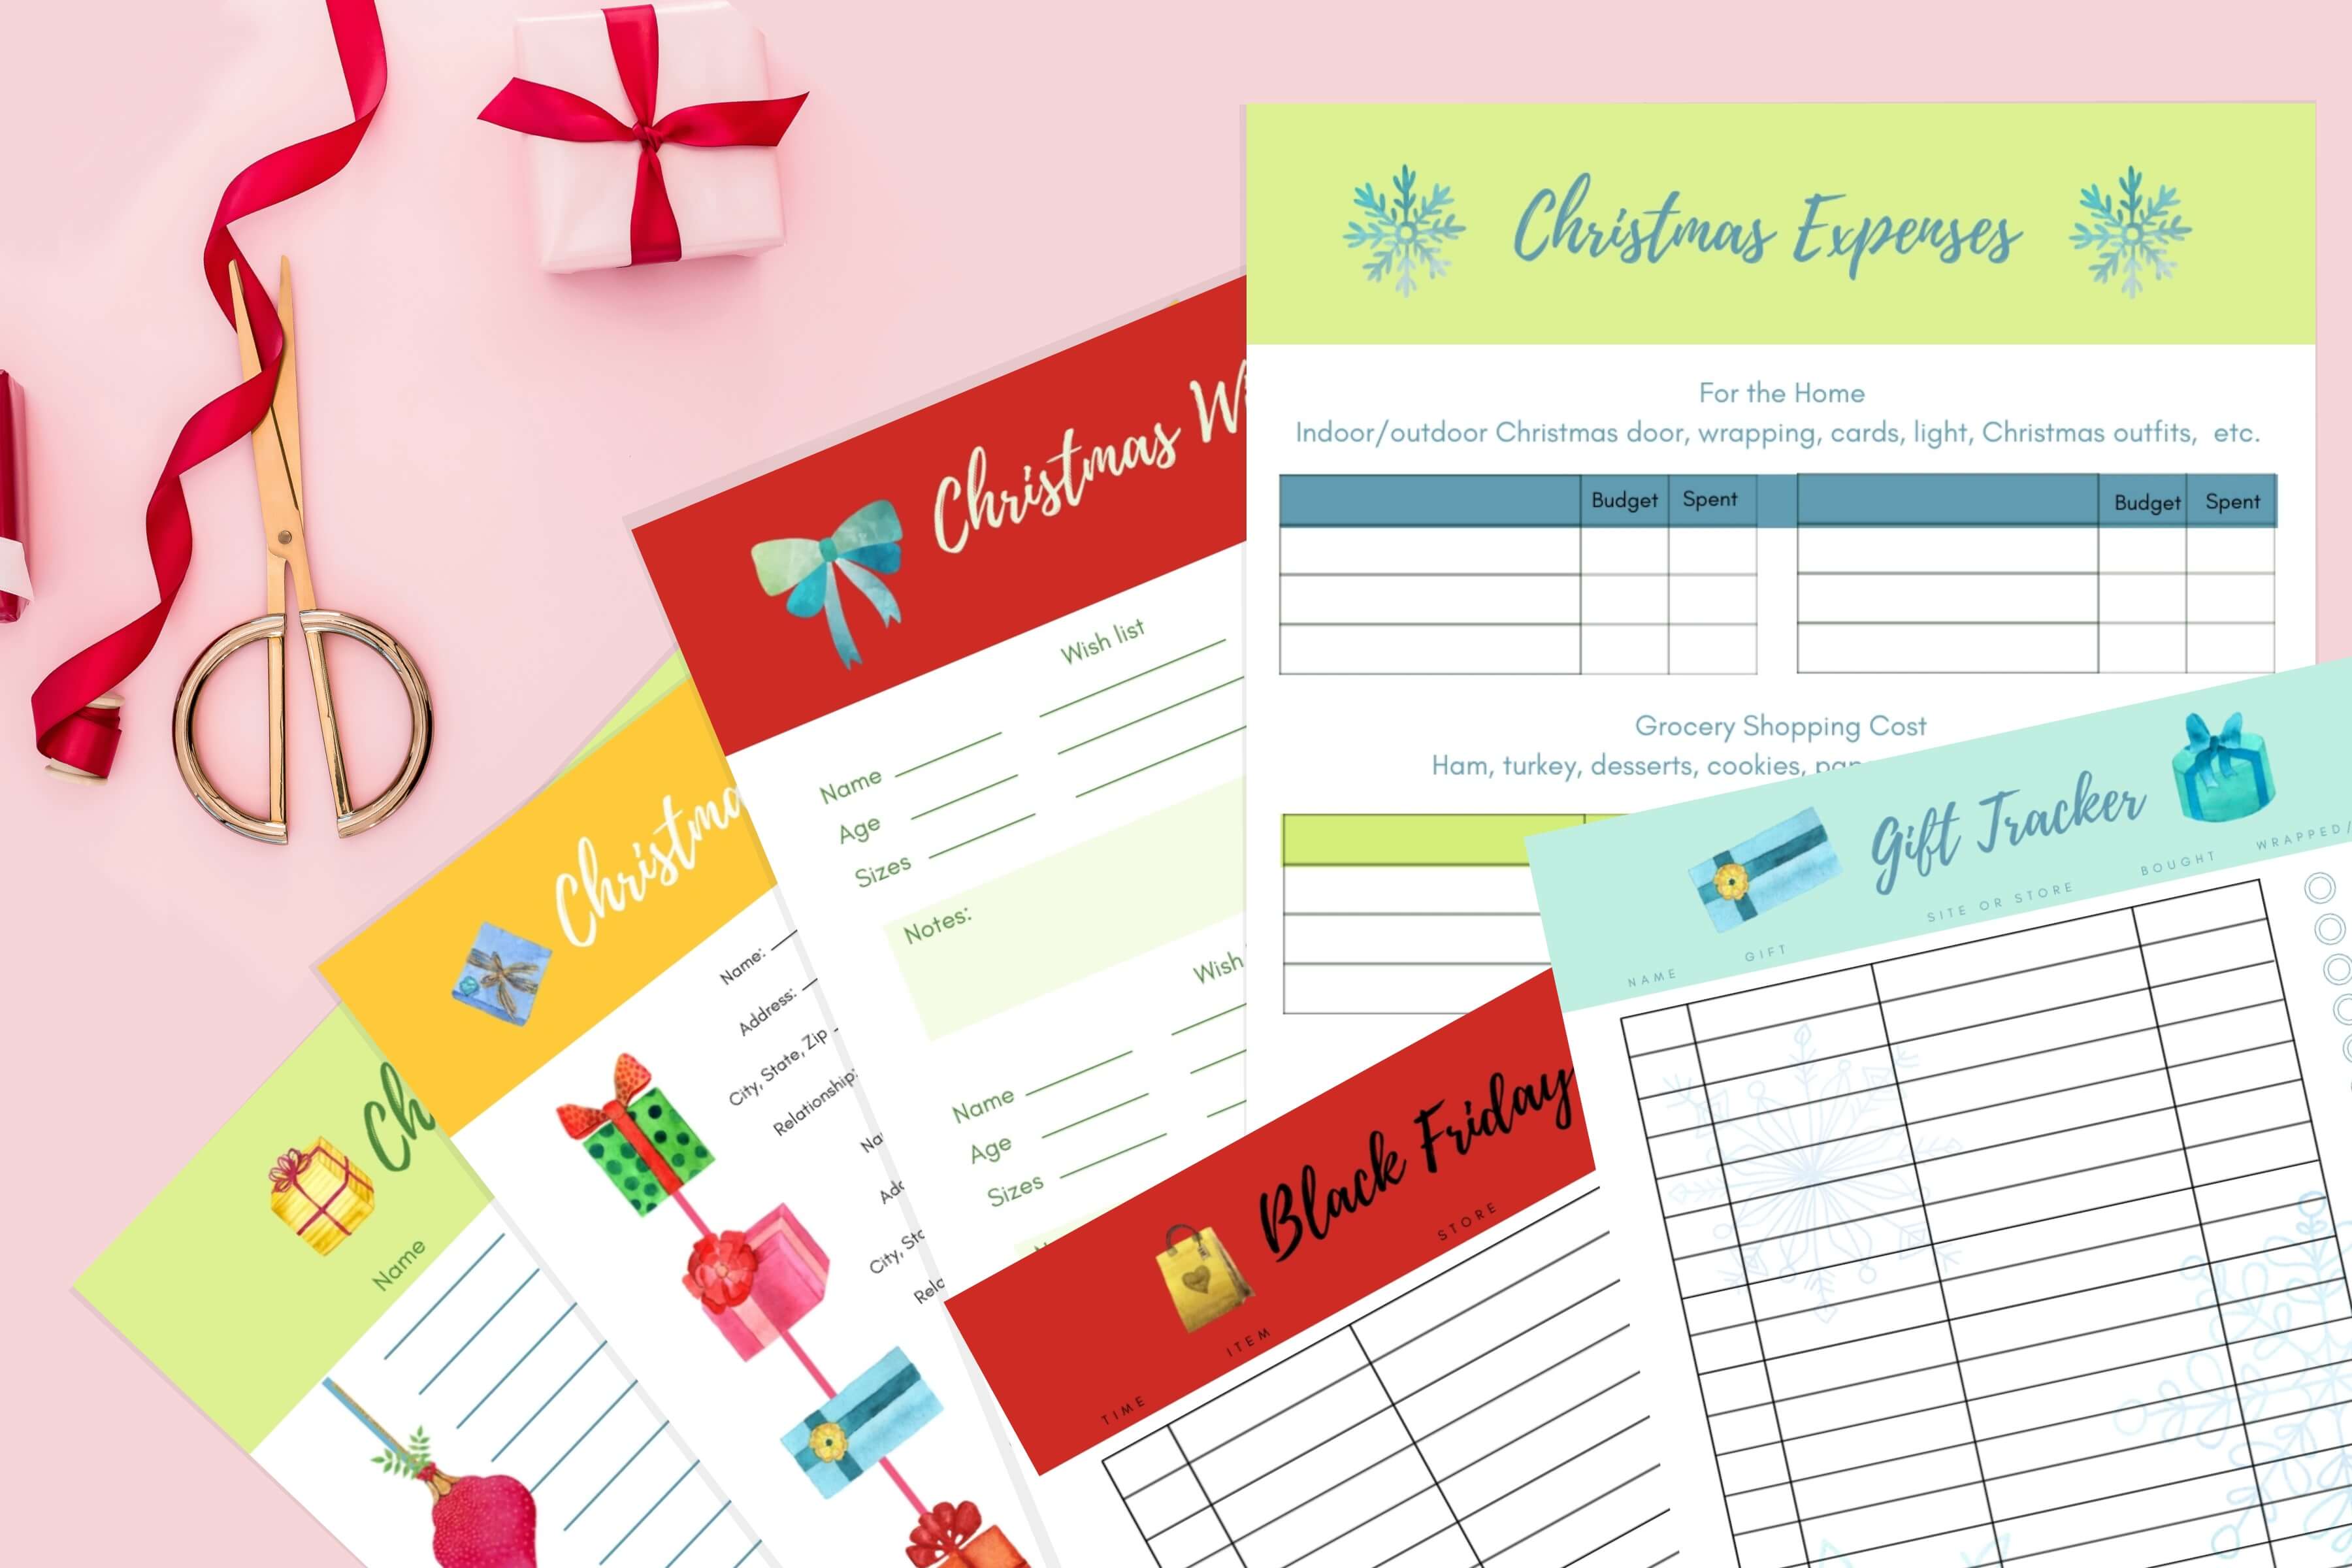 Christmas Holiday Planner: The Happier Holiday Printable Planner is everything you need to get organized and stay stress free this holiday season!